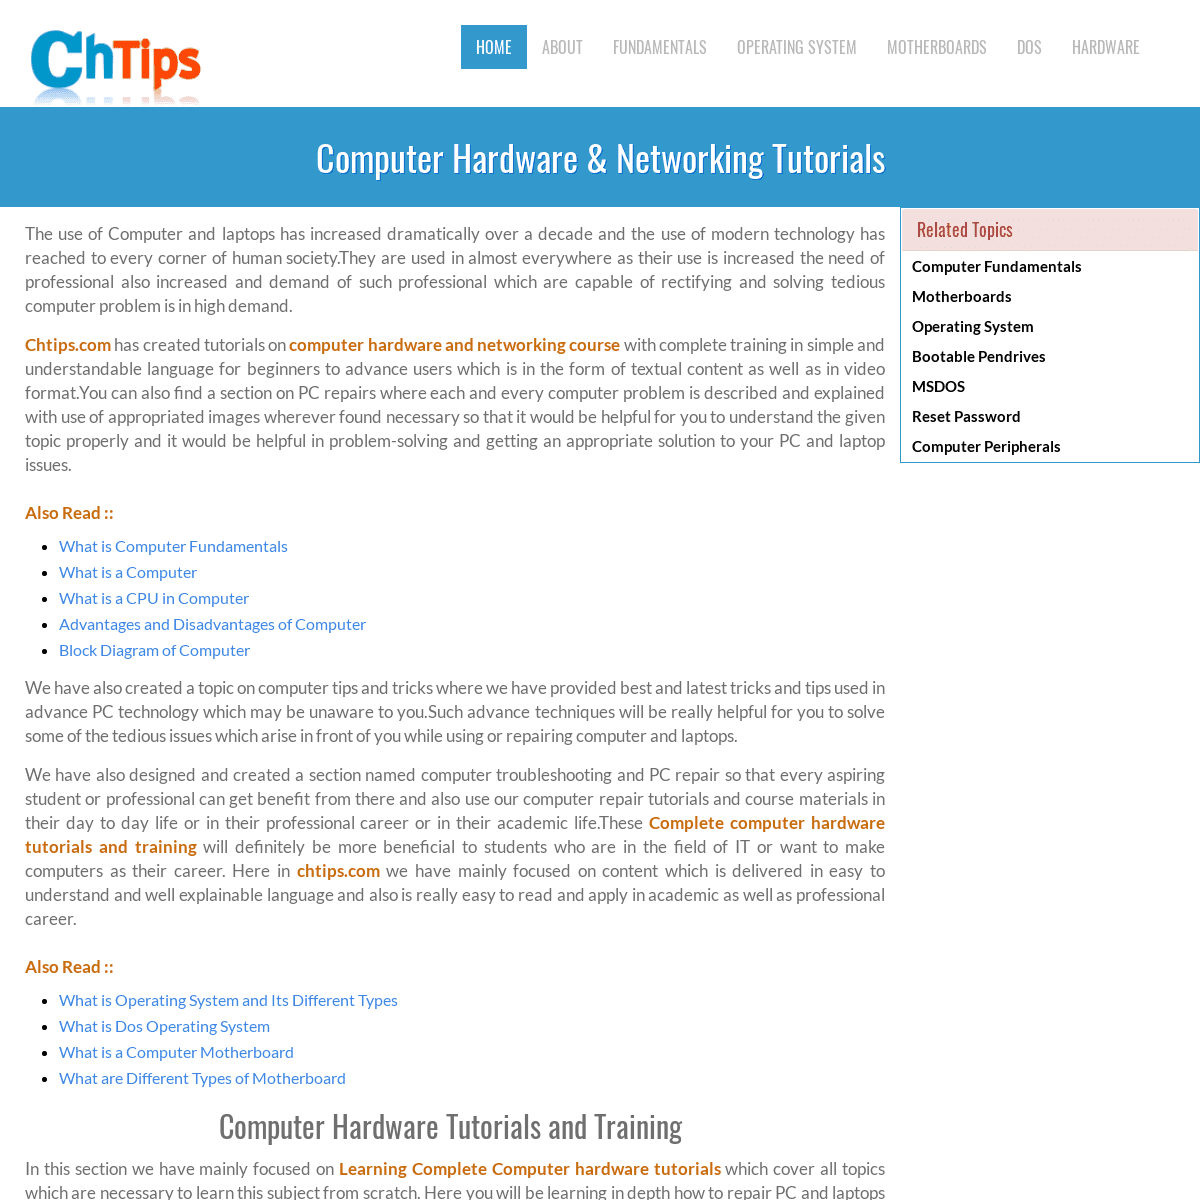 A complete backup of chtips.com